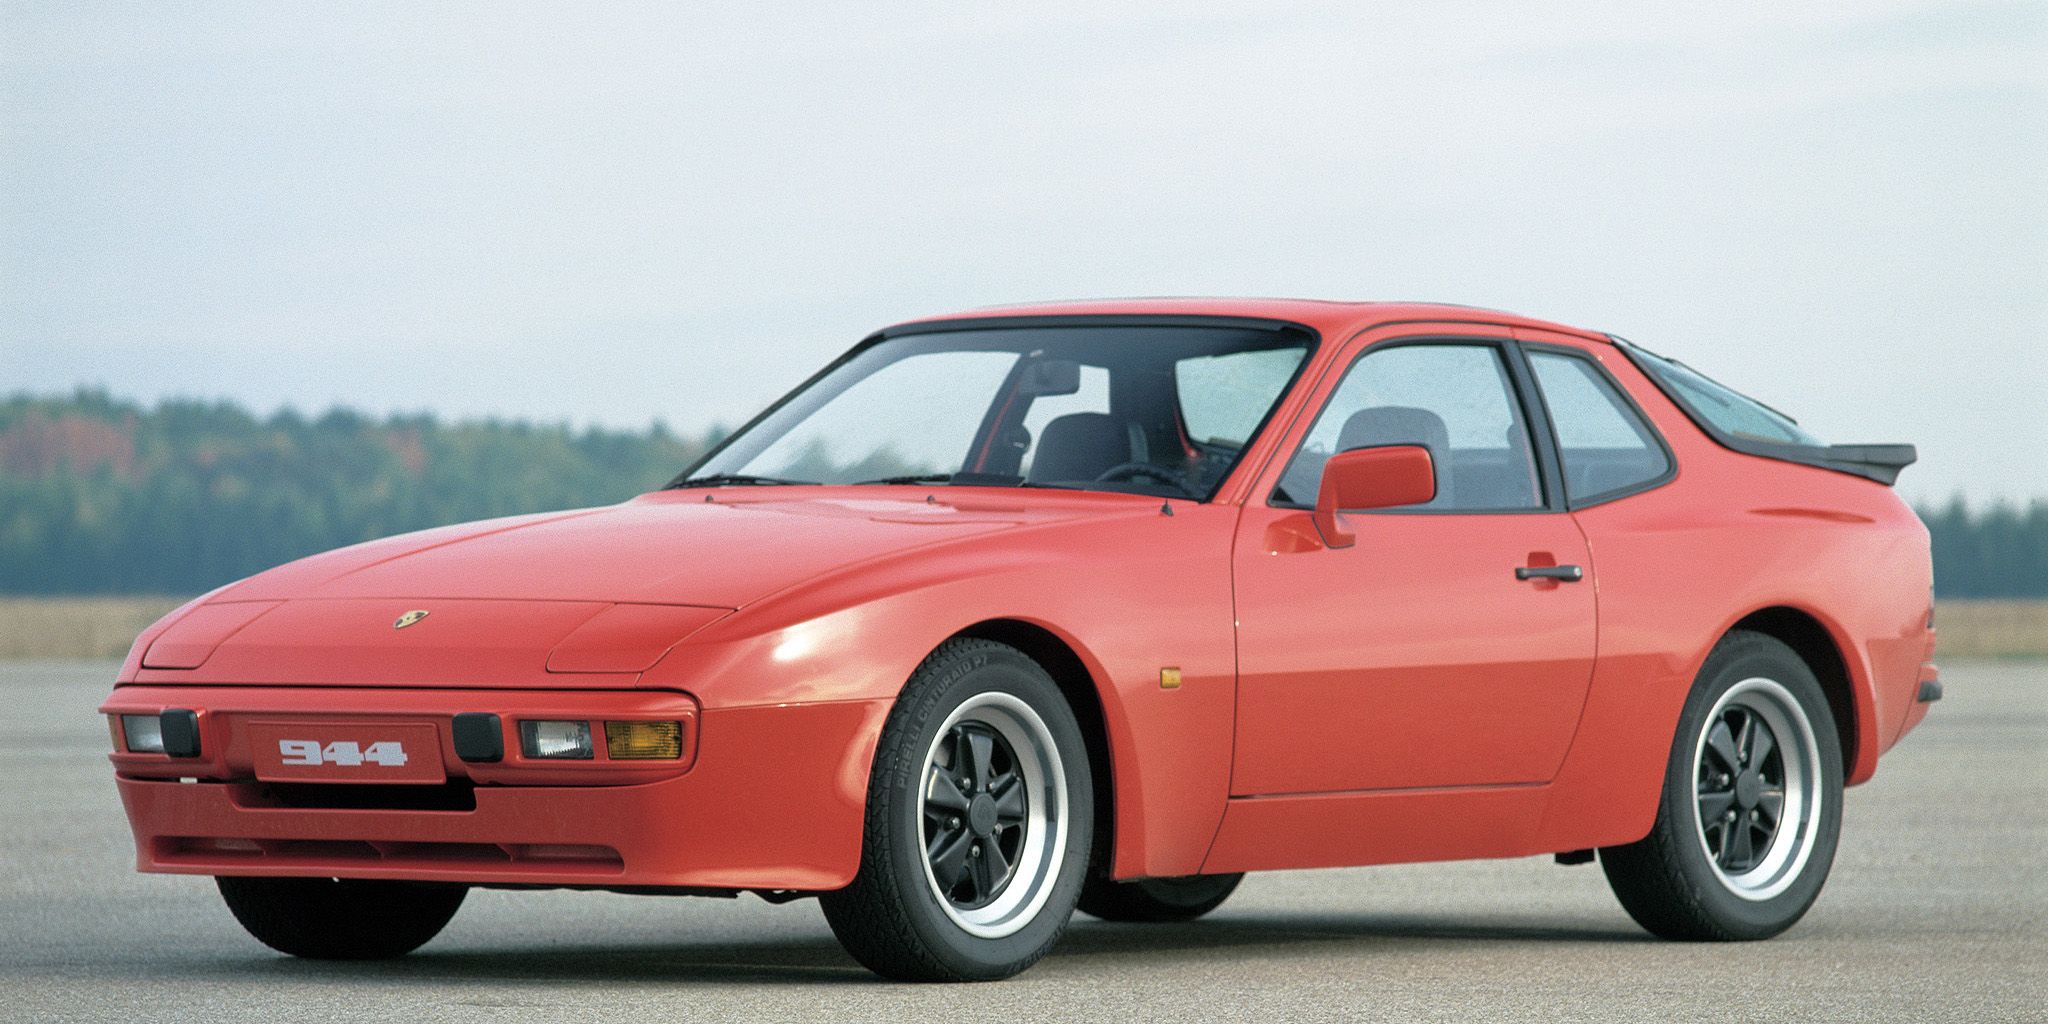 10 Cool Project Cars That You Can Buy For Less Than $10,000